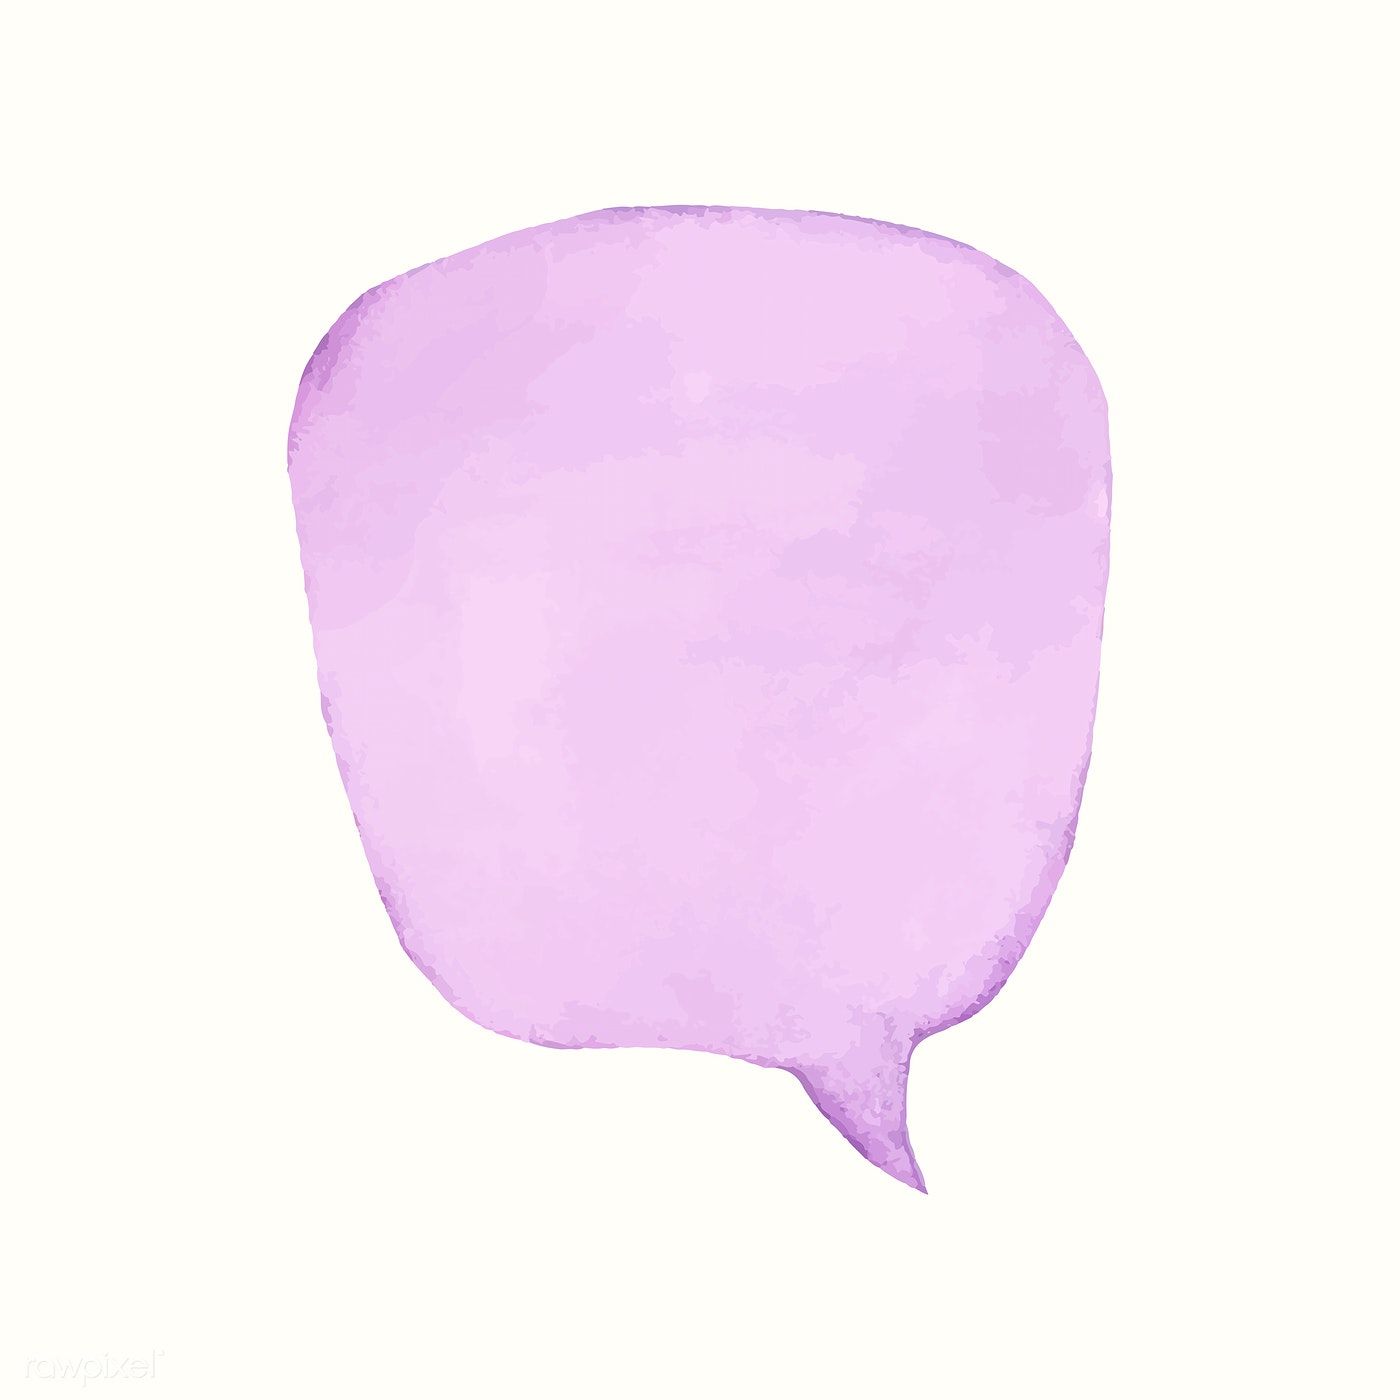 Illustration of an empty colorful speech bubble. free image by rawpixel.com / Aum. Free vector illustration, Illustration, Speech bubble